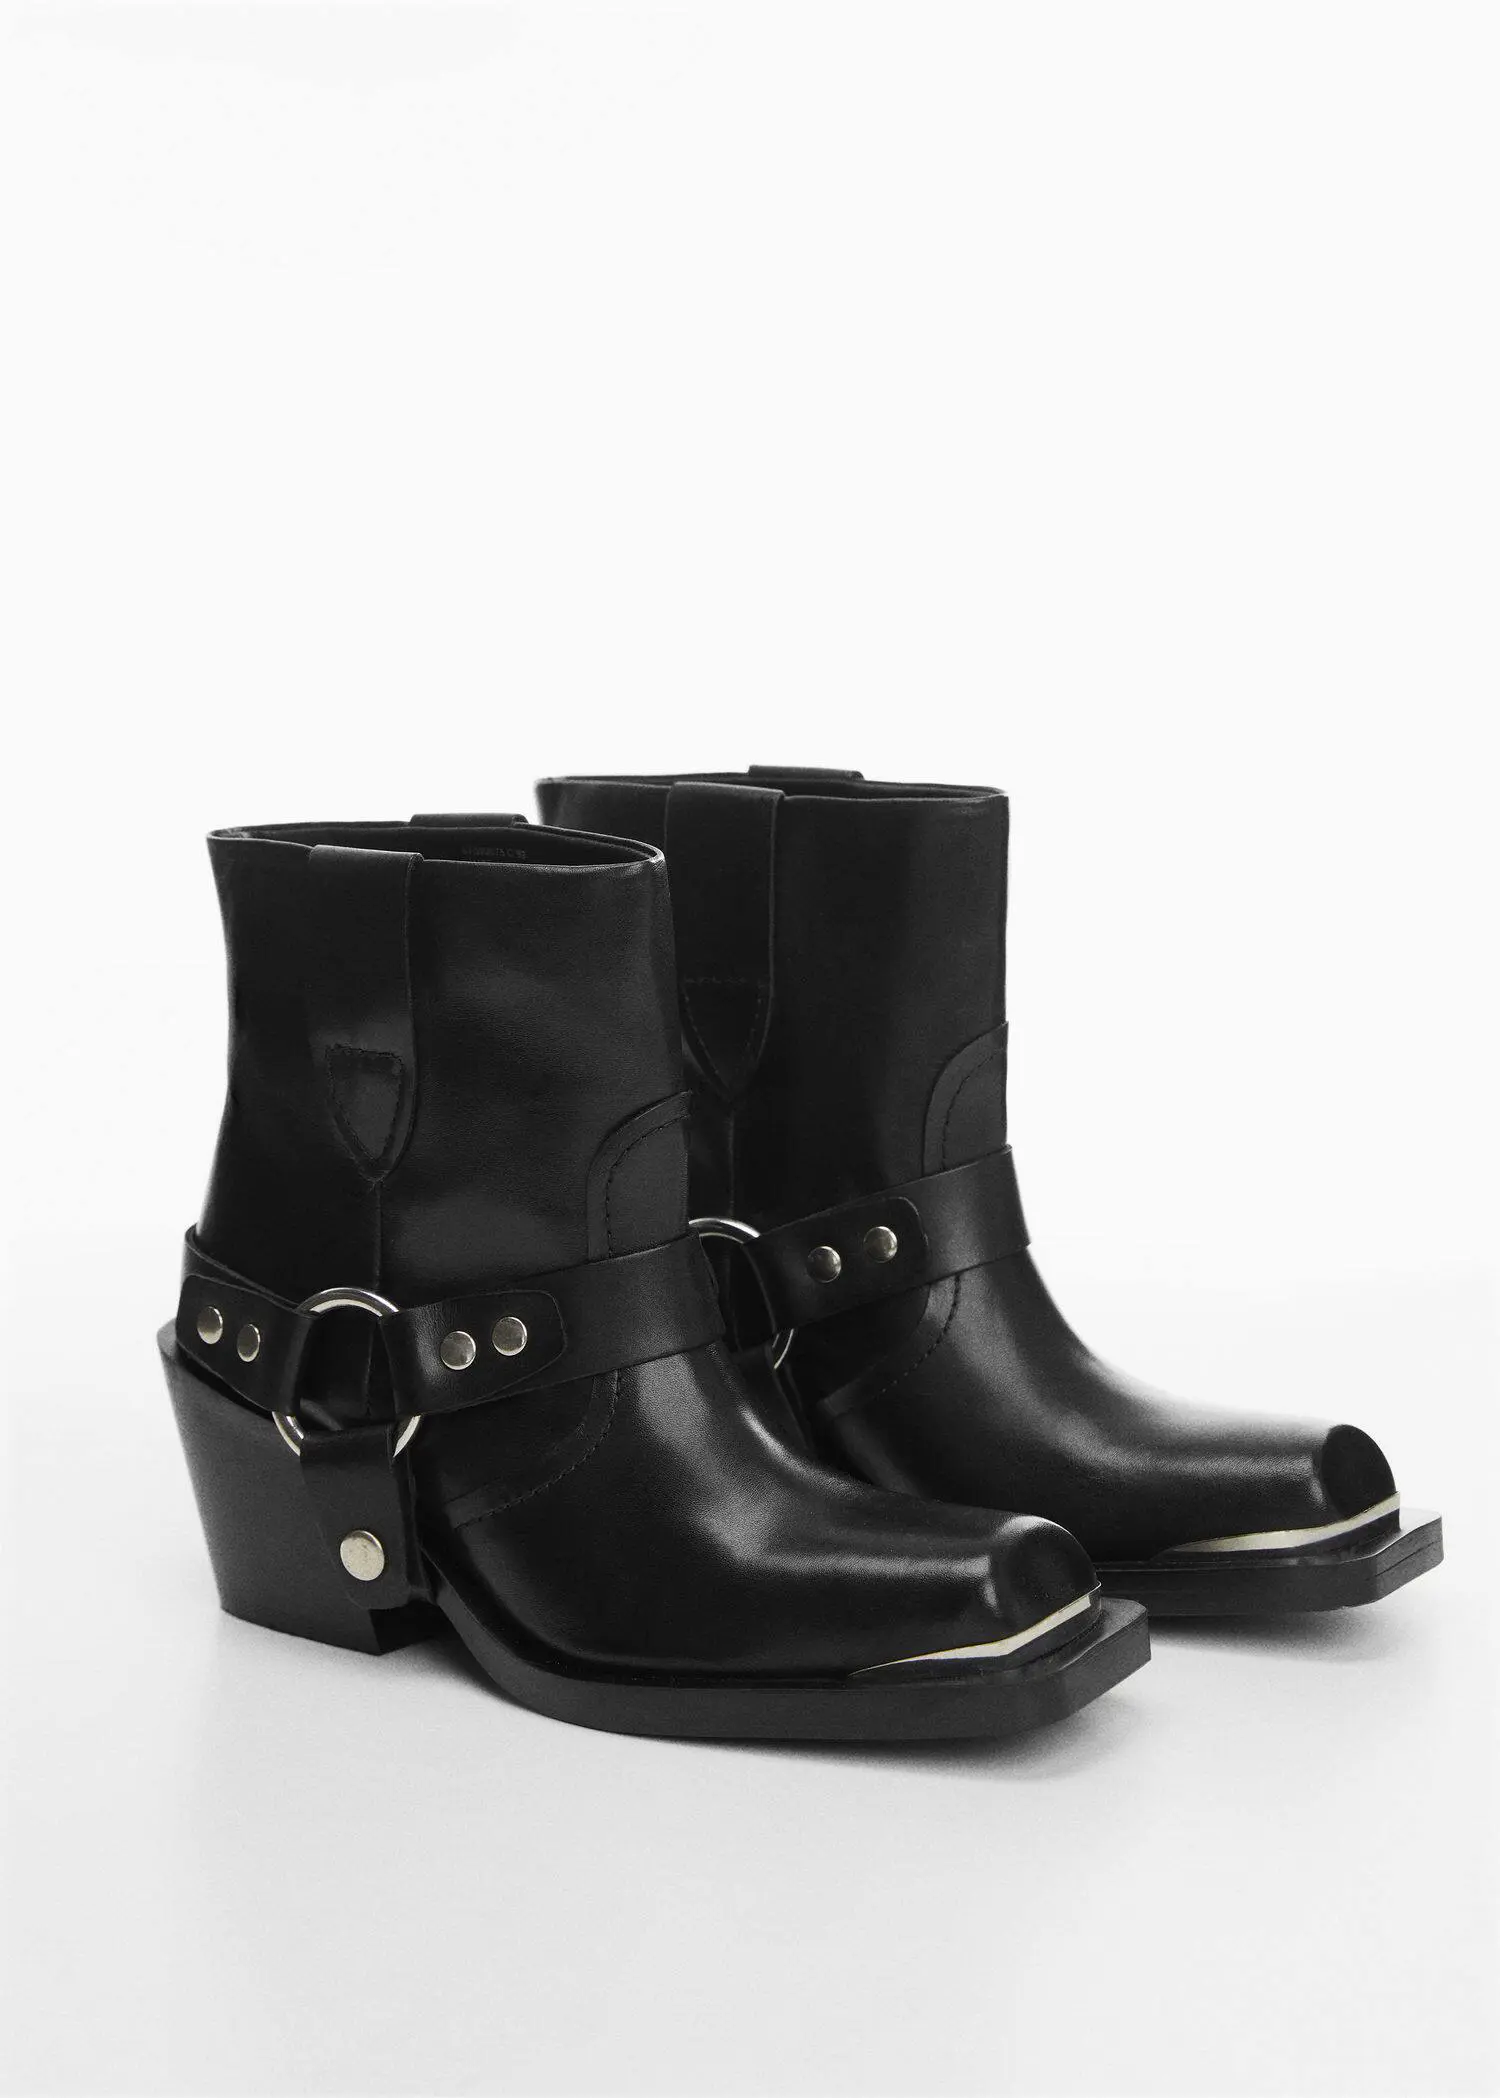 Mango Buckle ankle boots. 3